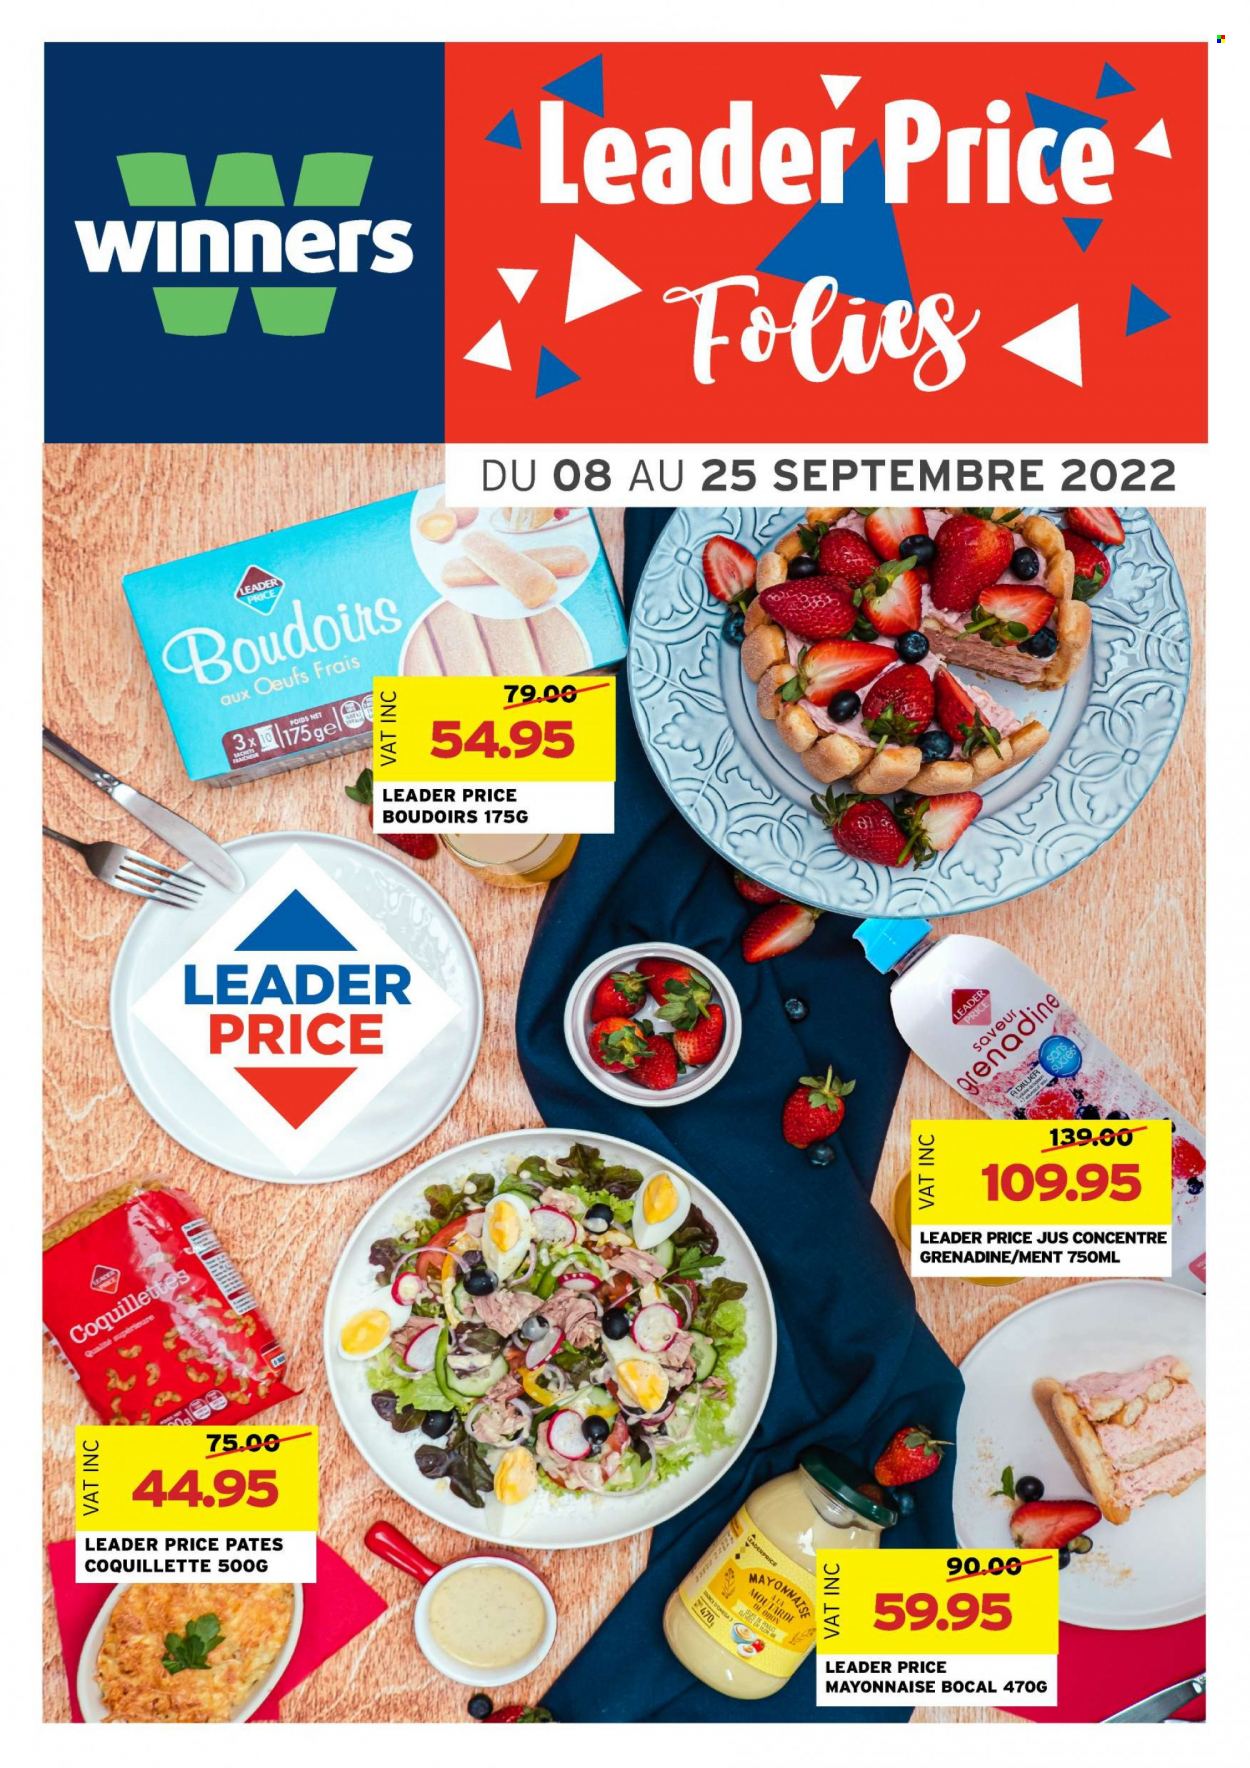 Winner's Catalogue - 8.09.2022 - 25.09.2022 - Sales products - mayonnaise, grenadine, Omega-3. Page 1.